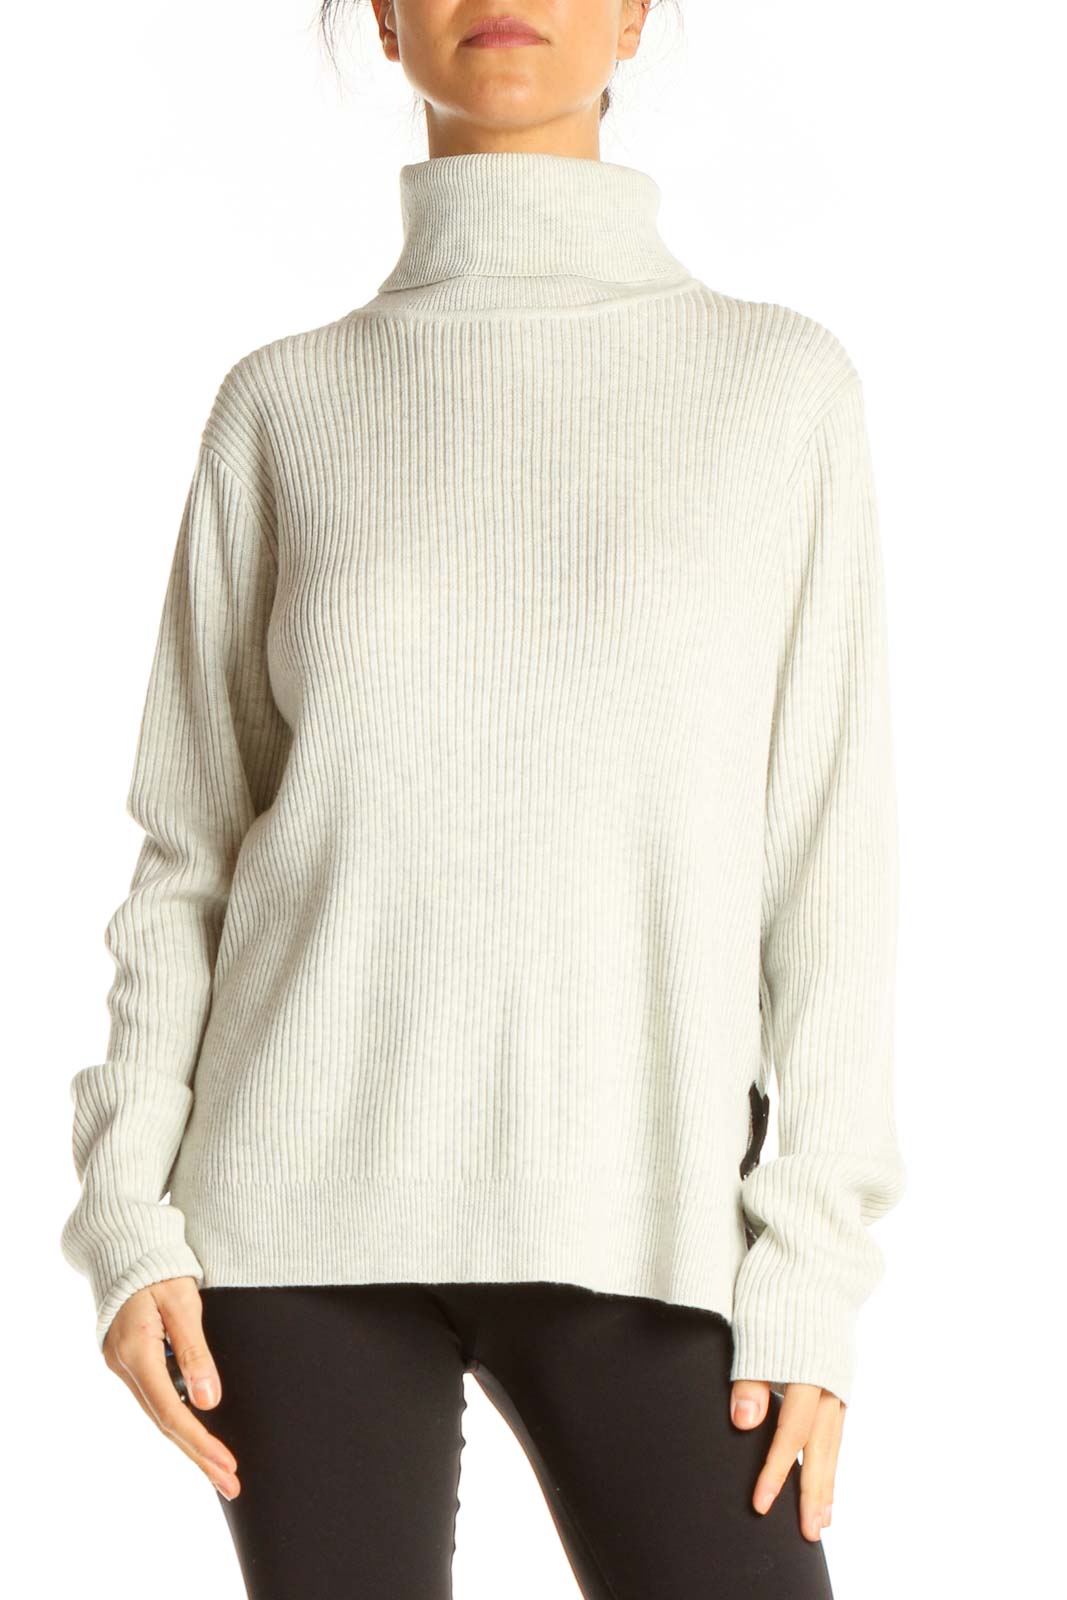 White Casual Sweater Front